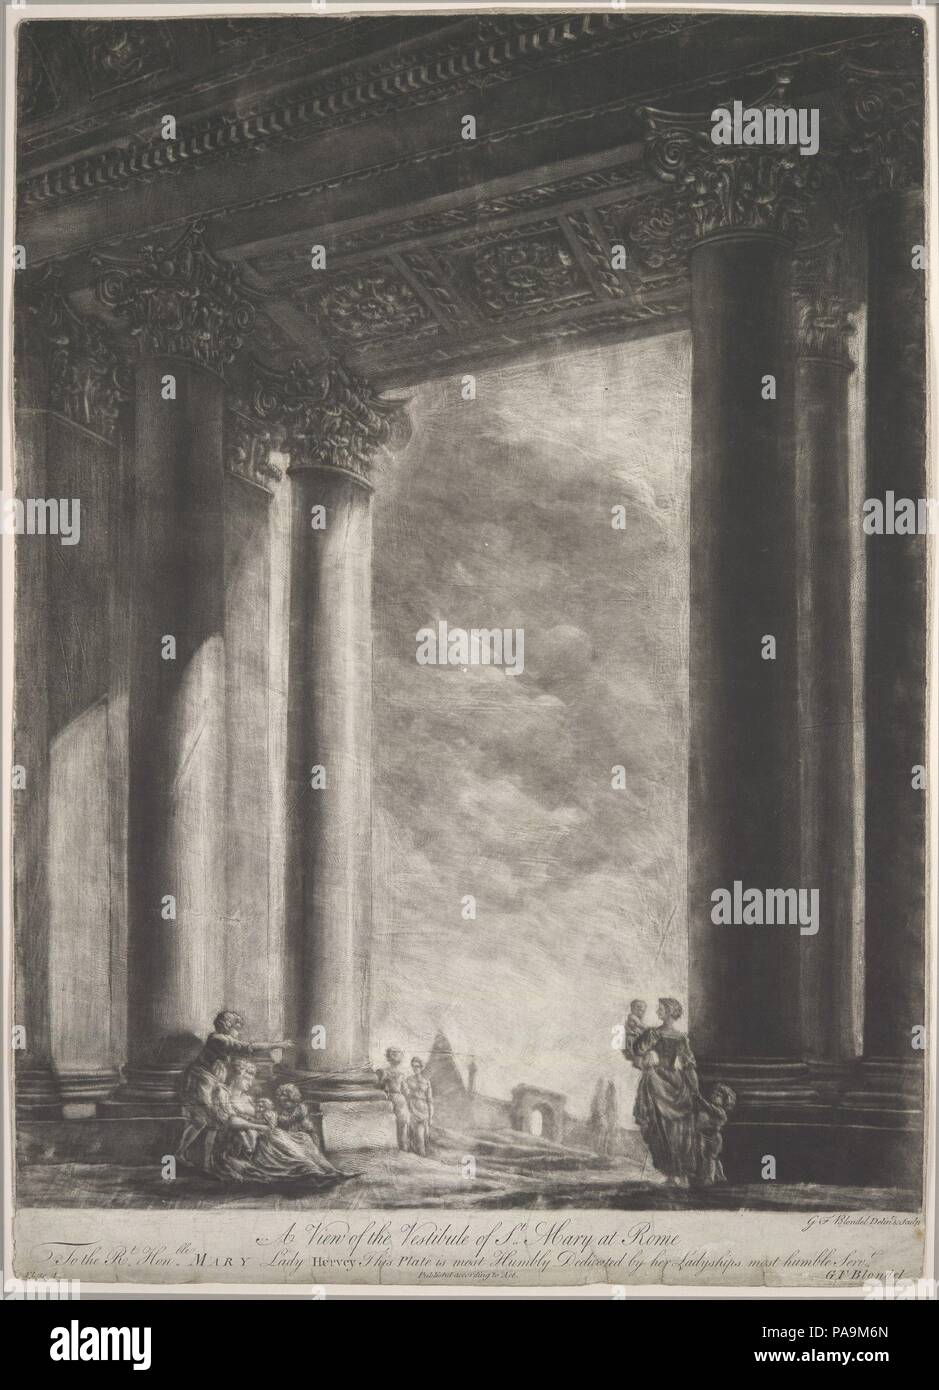 A View of the Vestibule of Santa Maria Maggiore at Rome. Artist and publisher: Georges François Blondel (French, 1730-after 1792). Dimensions: Sheet: 22 1/4 x 16 in. (56.5 x 40.6 cm). Published in: London. Date: 1765-67.  Georges-François Blondel was the son of a leading French architectural theorist Jacques-François Blondel. After training in Paris, he worked first in Rome and then in London, where he learned the technique of mezzotint engraving. This print depicts a celebrated structure of eighteenth-century Rome, Ferdinando Fuga's dramatic facade of the Church of Santa Maria Maggiore, compl Stock Photo